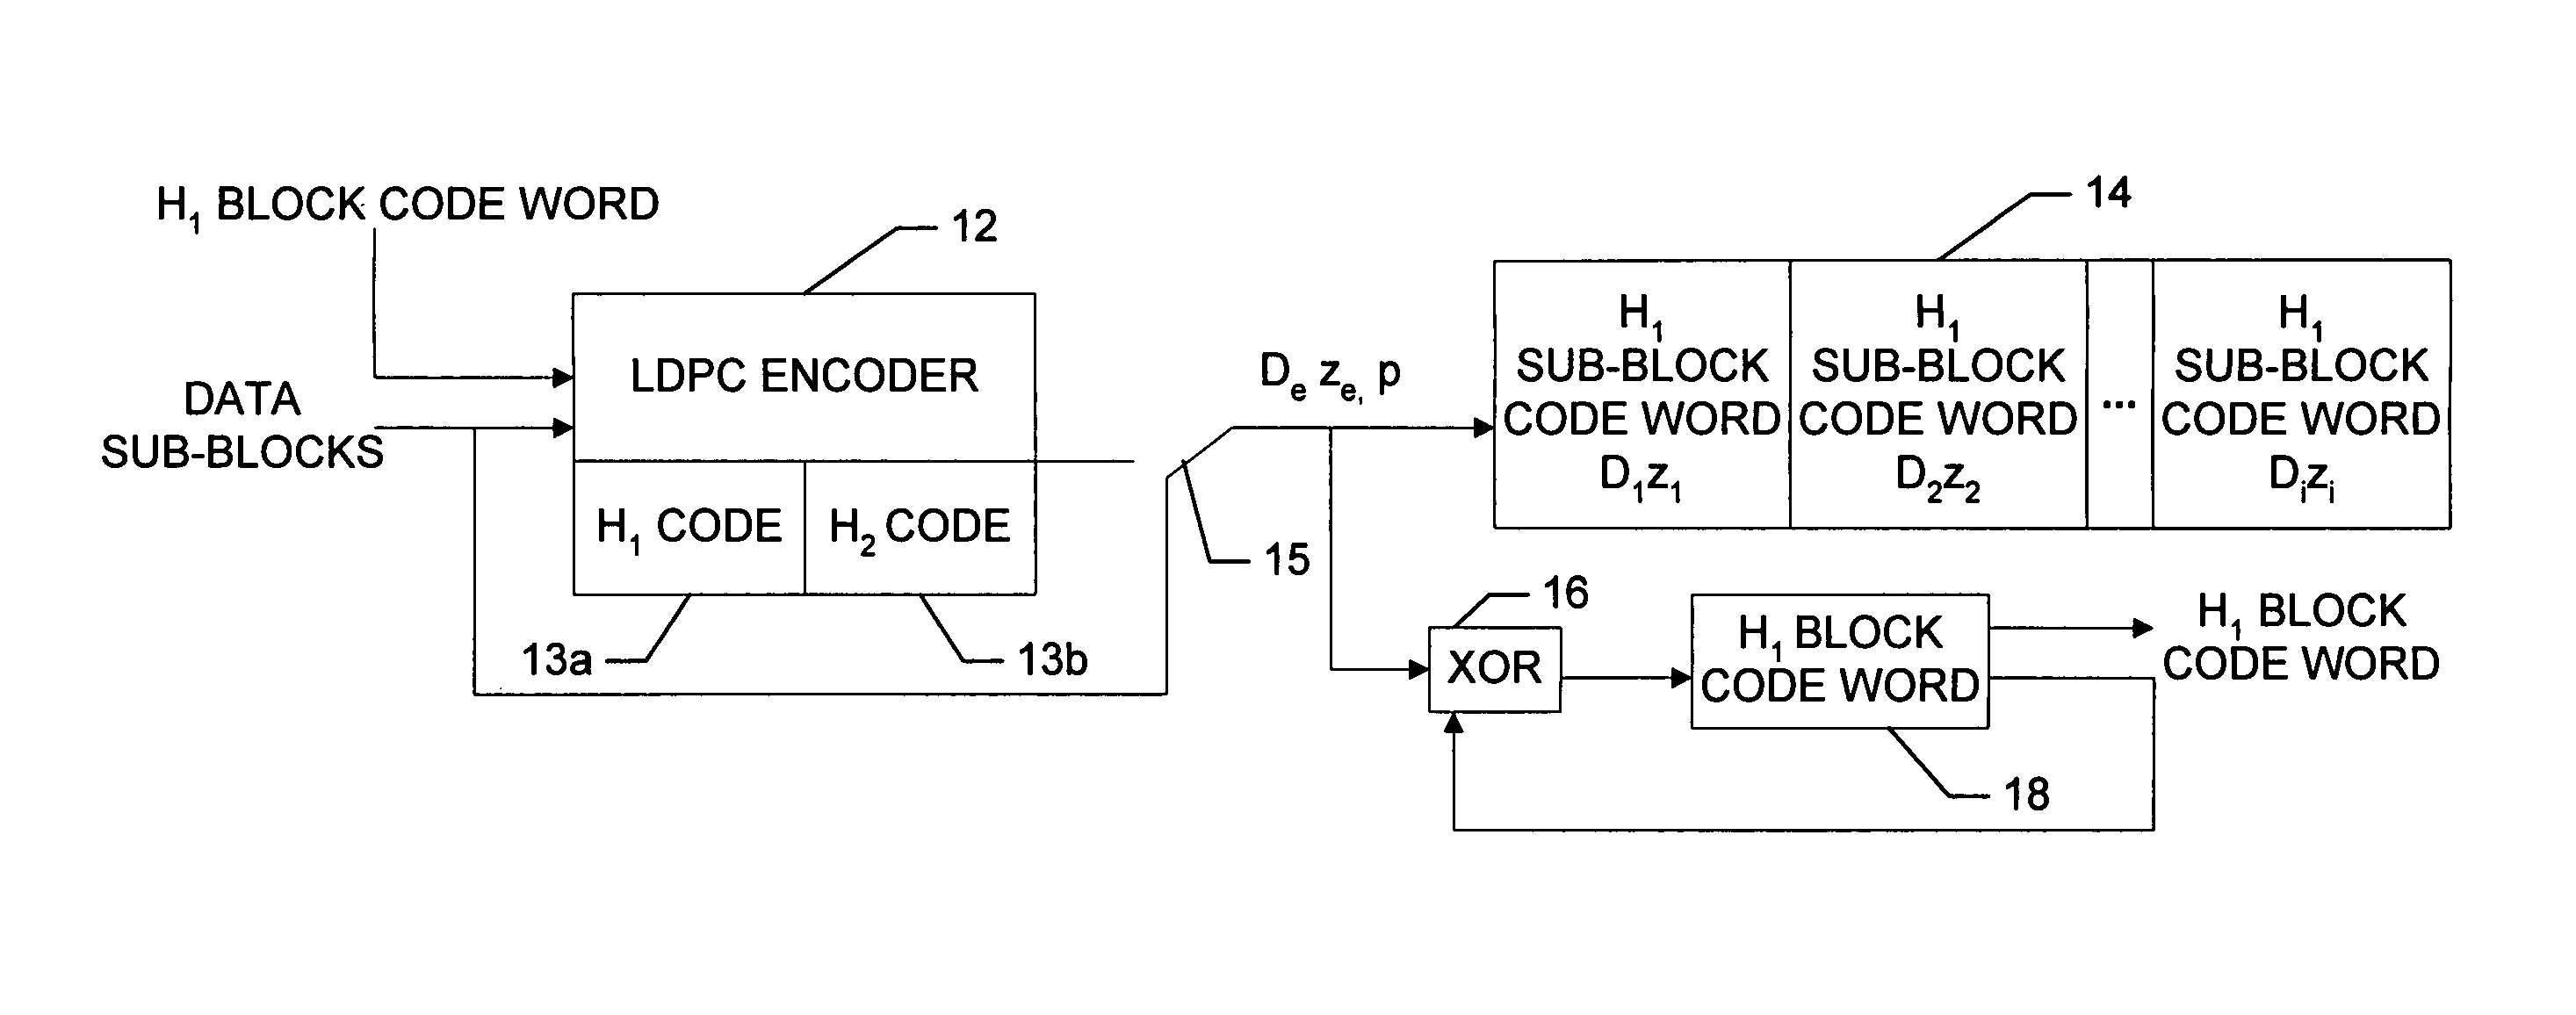 Nested LDPC encoders and decoder